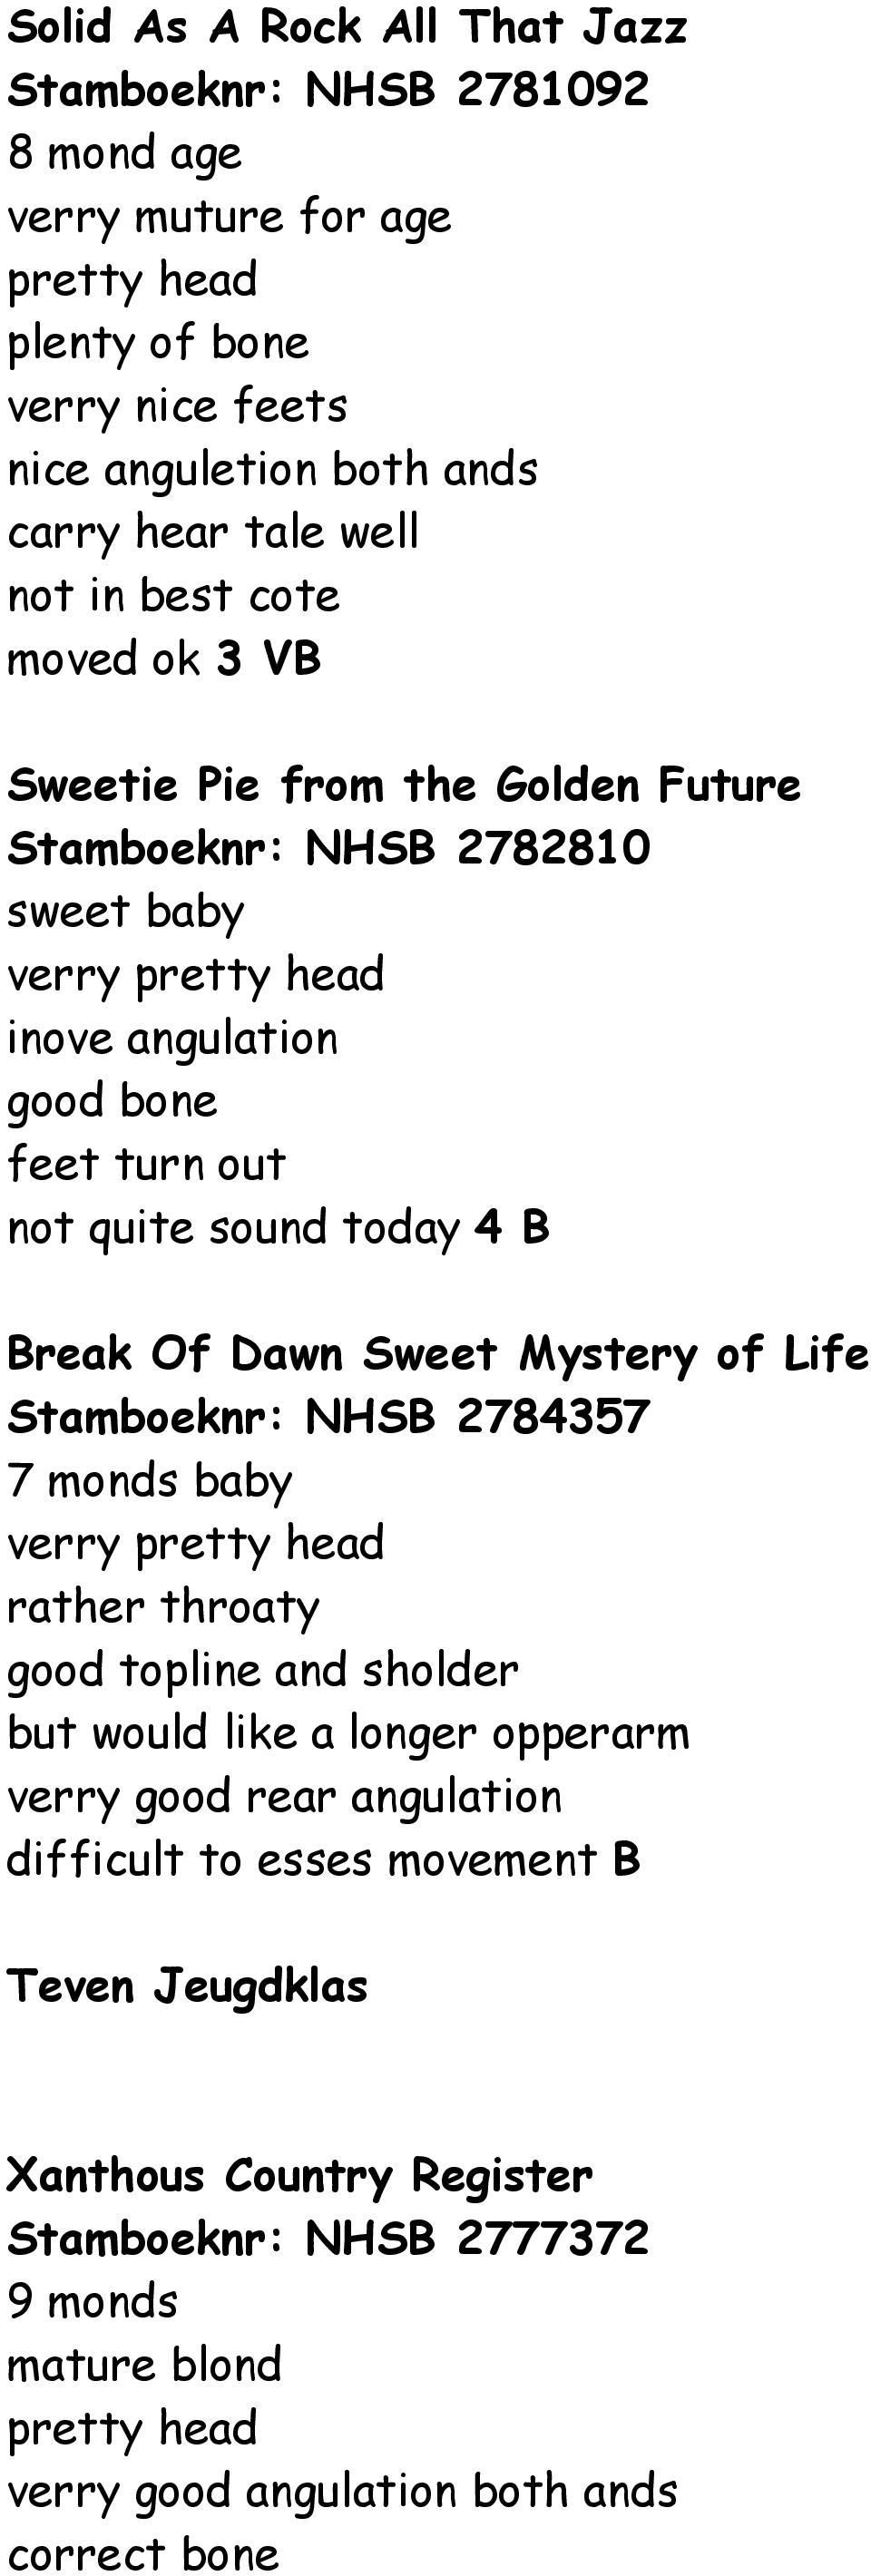 Break Of Dawn Sweet Mystery of Life Stamboeknr: NHSB 2784357 7 monds baby verry pretty head rather throaty good topline and sholder but would like a longer opperarm verry good rear